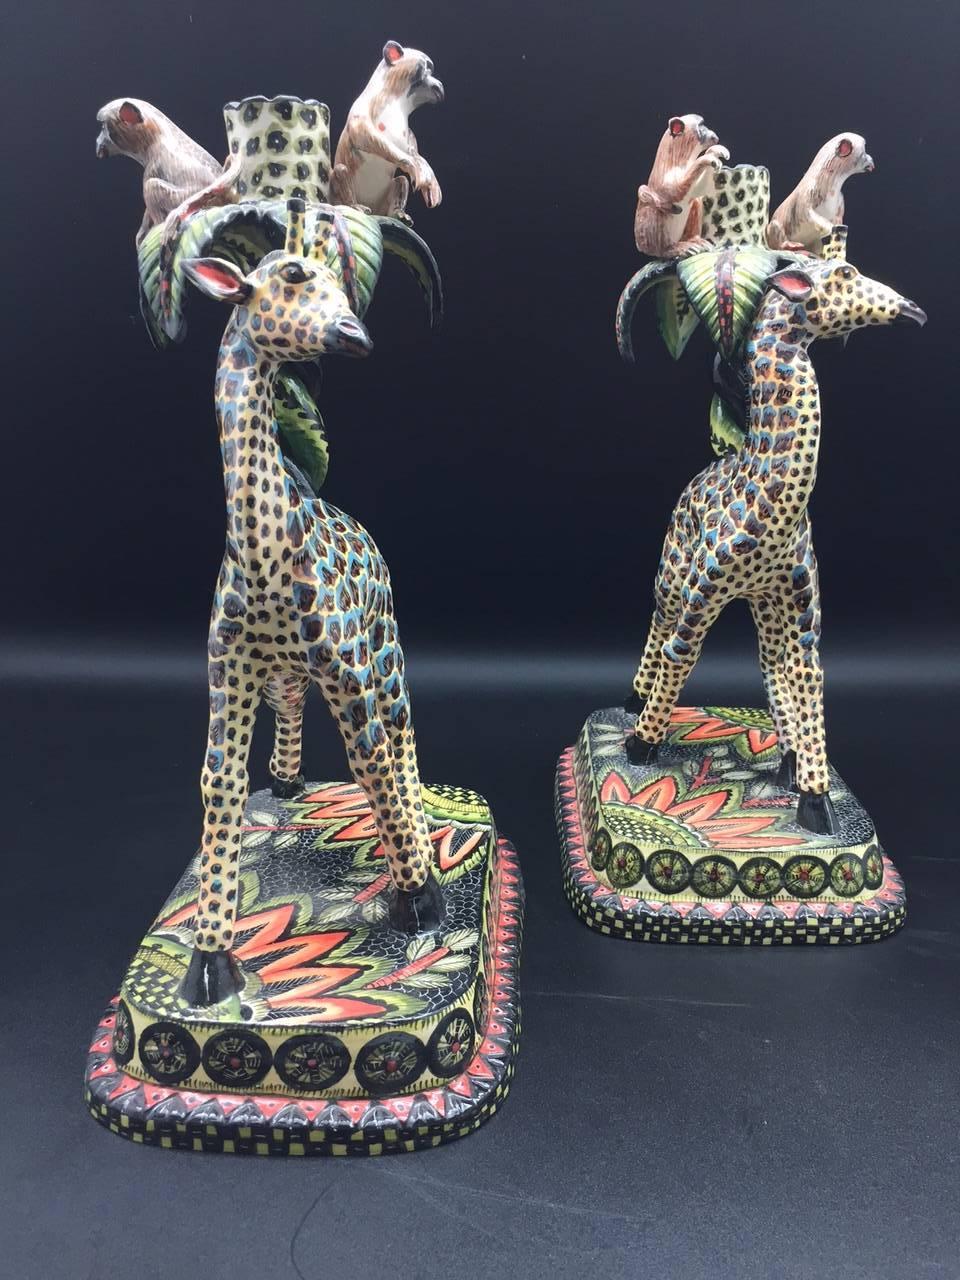 Giraffe and monkey candlestick holders, a pair, ceramic by Ardmore from South Africa. Sculpted by Sabelo Khoza, painted by Punch Shabalala. Measures: 7